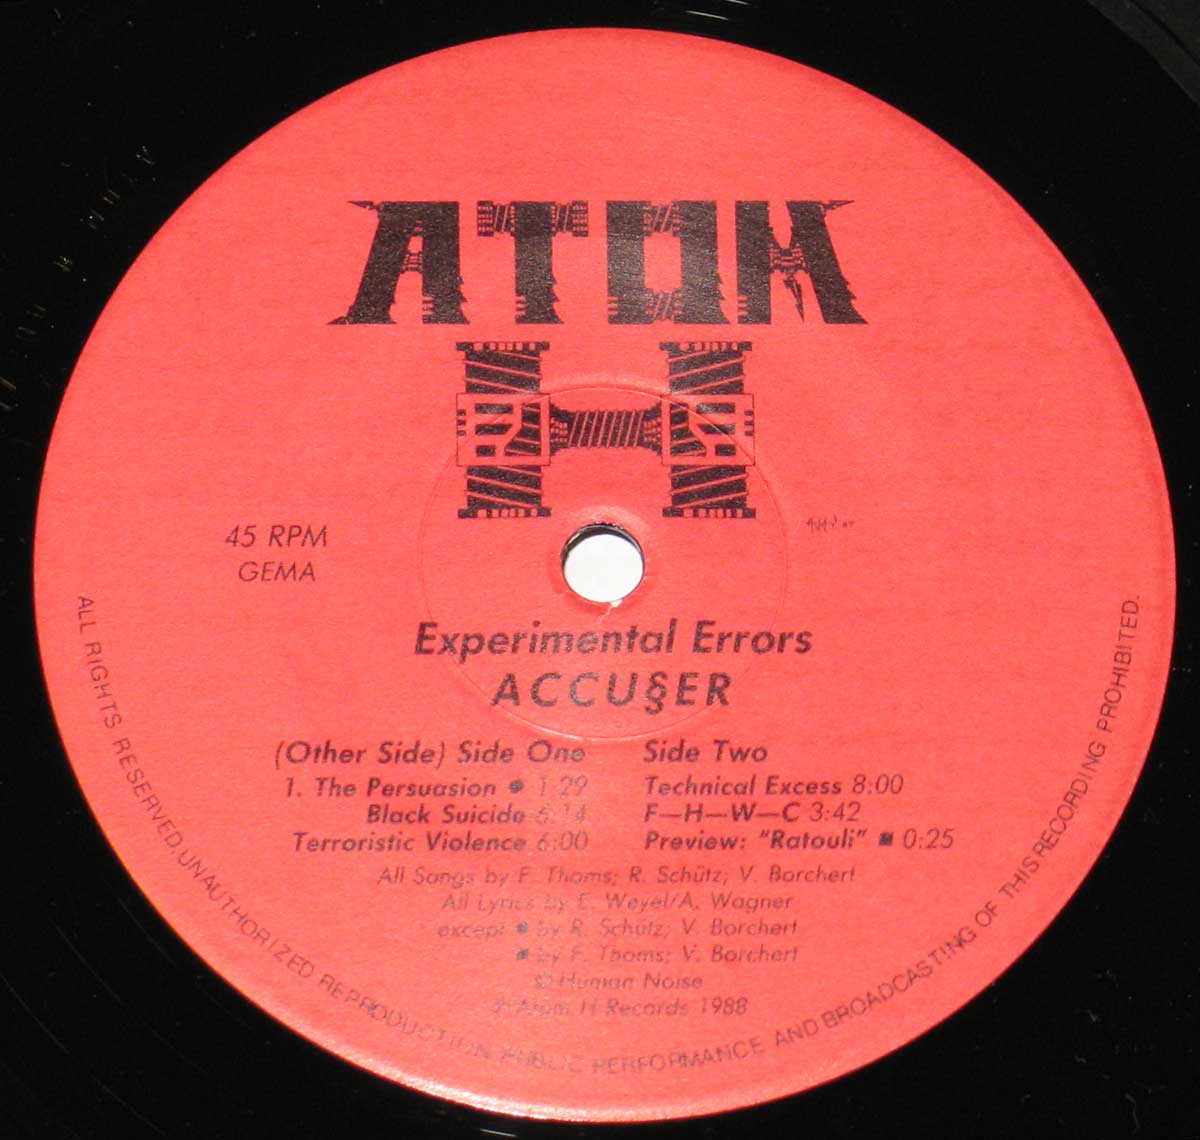 Photo of the ATOM-H Record Label 